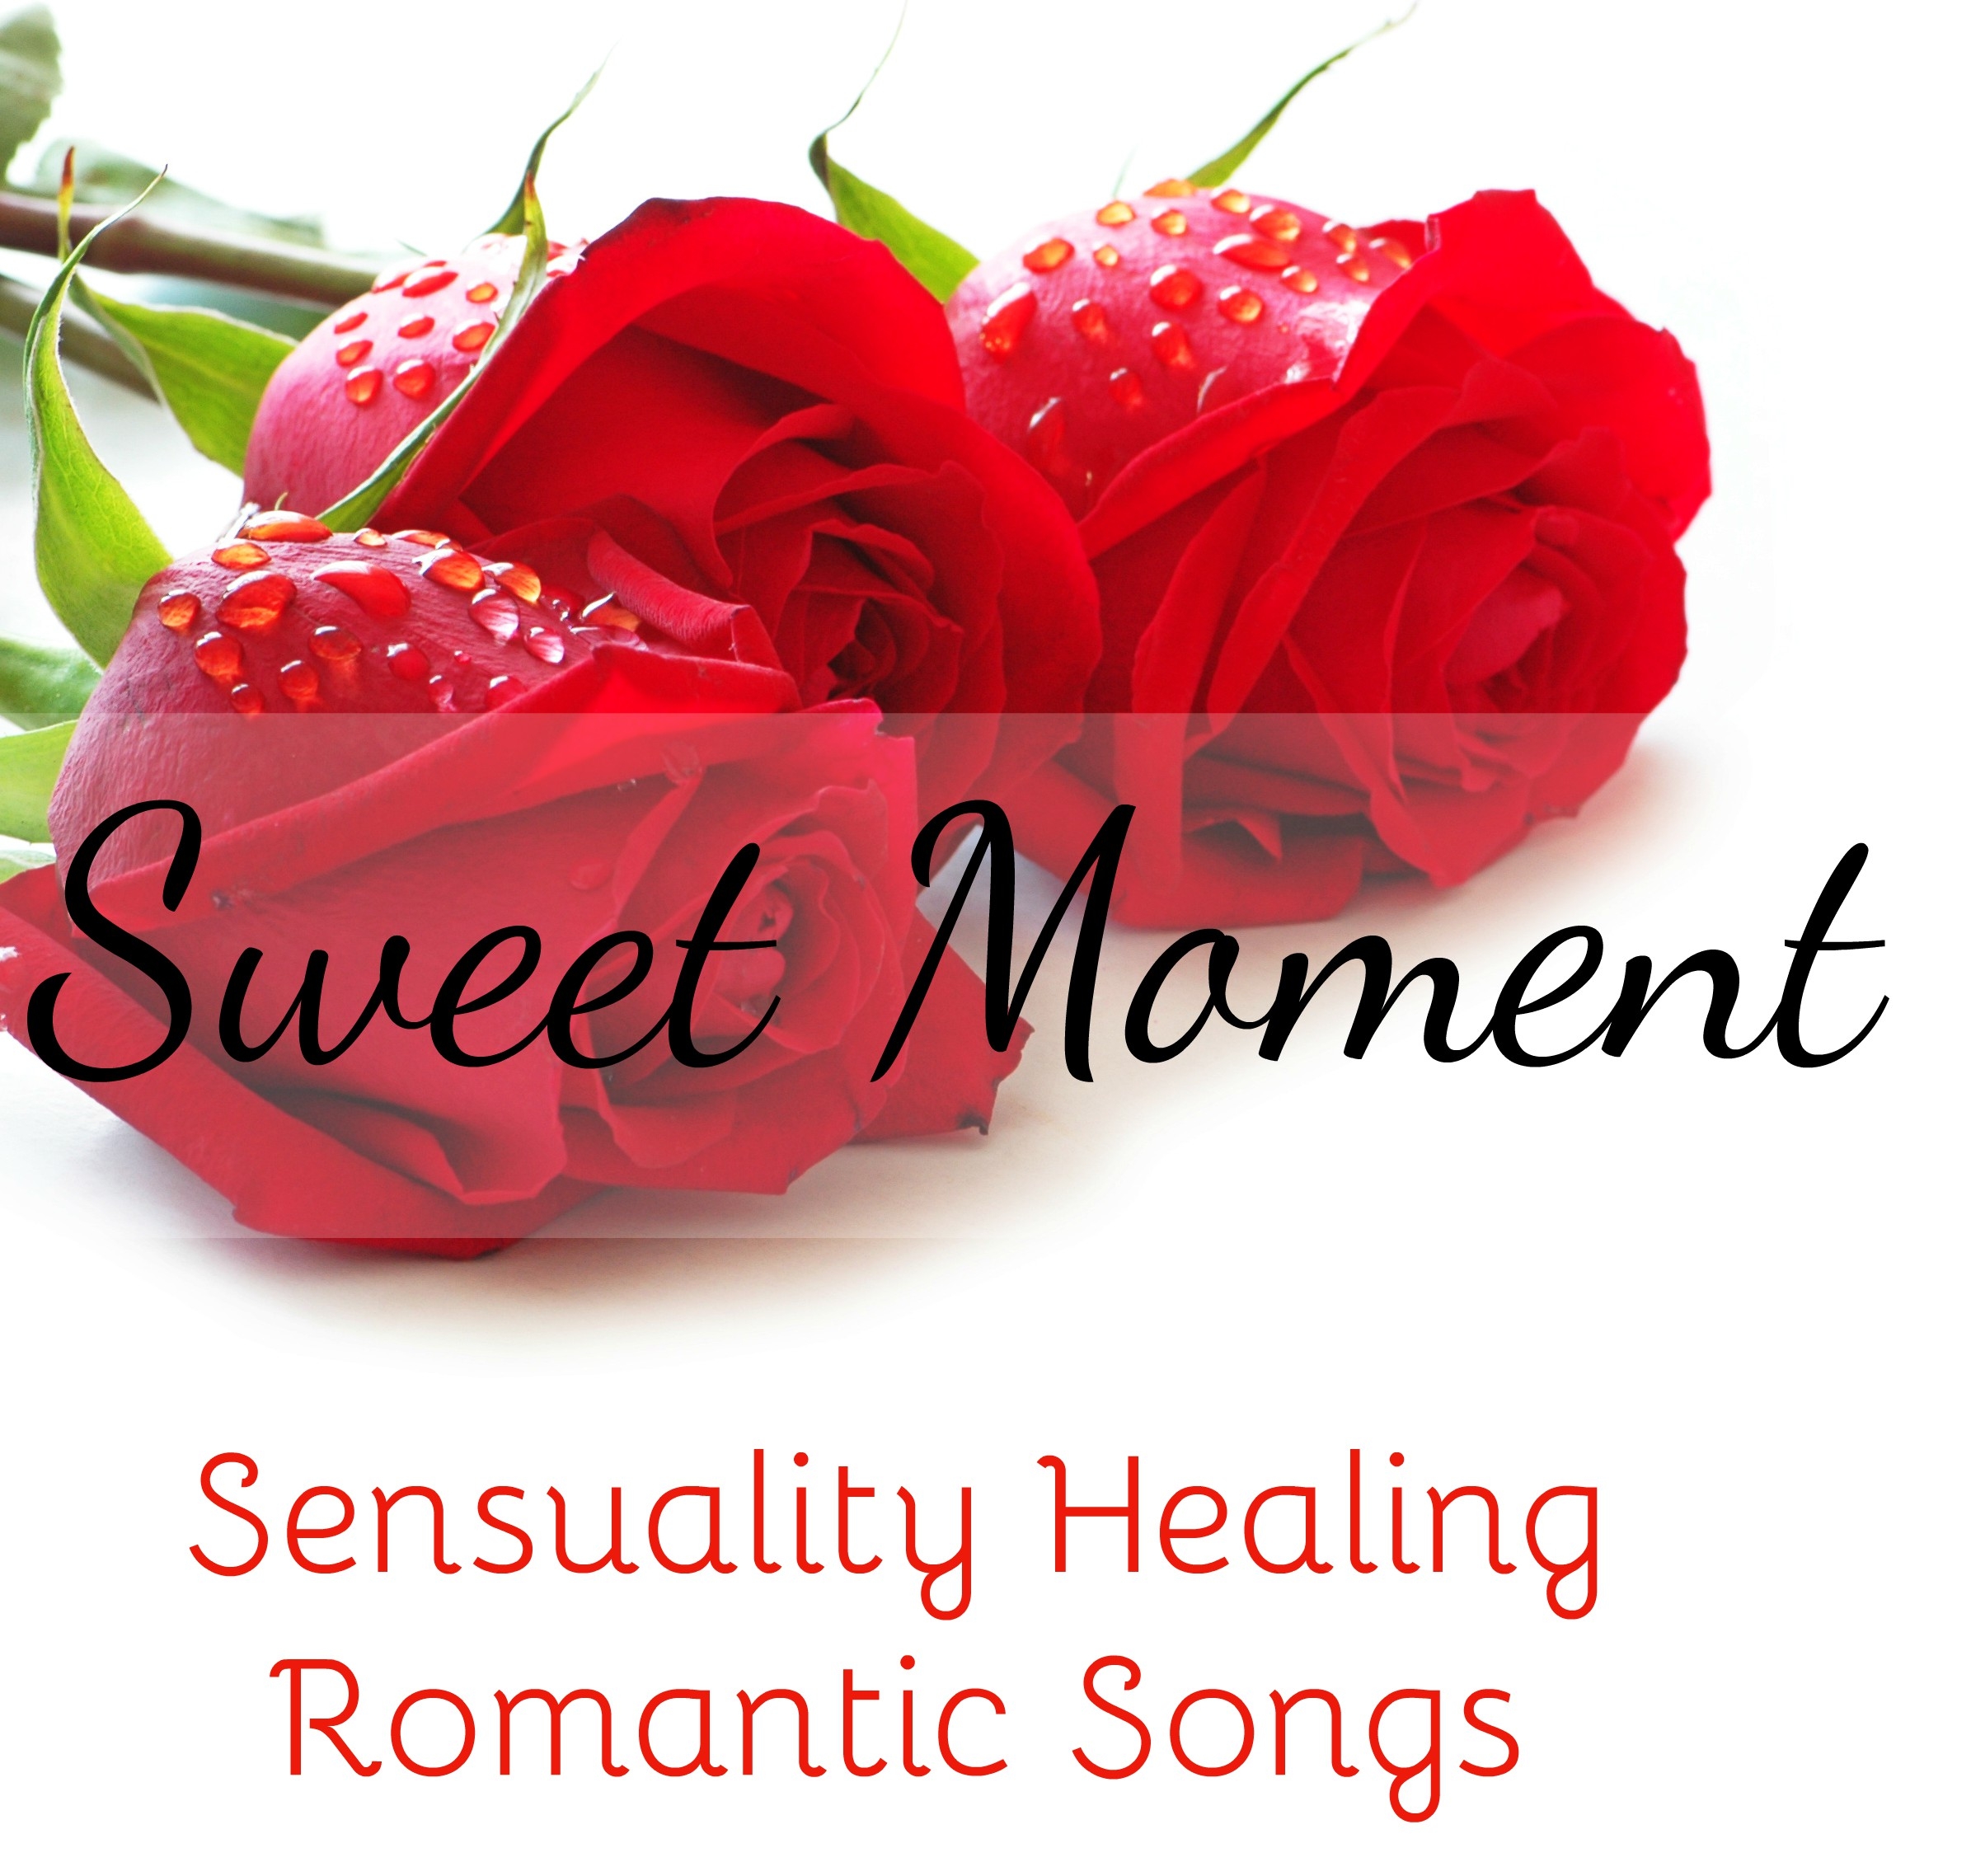 Sweet Moment - Sensuality Healing Romantic Songs with Chillout Easy Listening Piano Bar Music